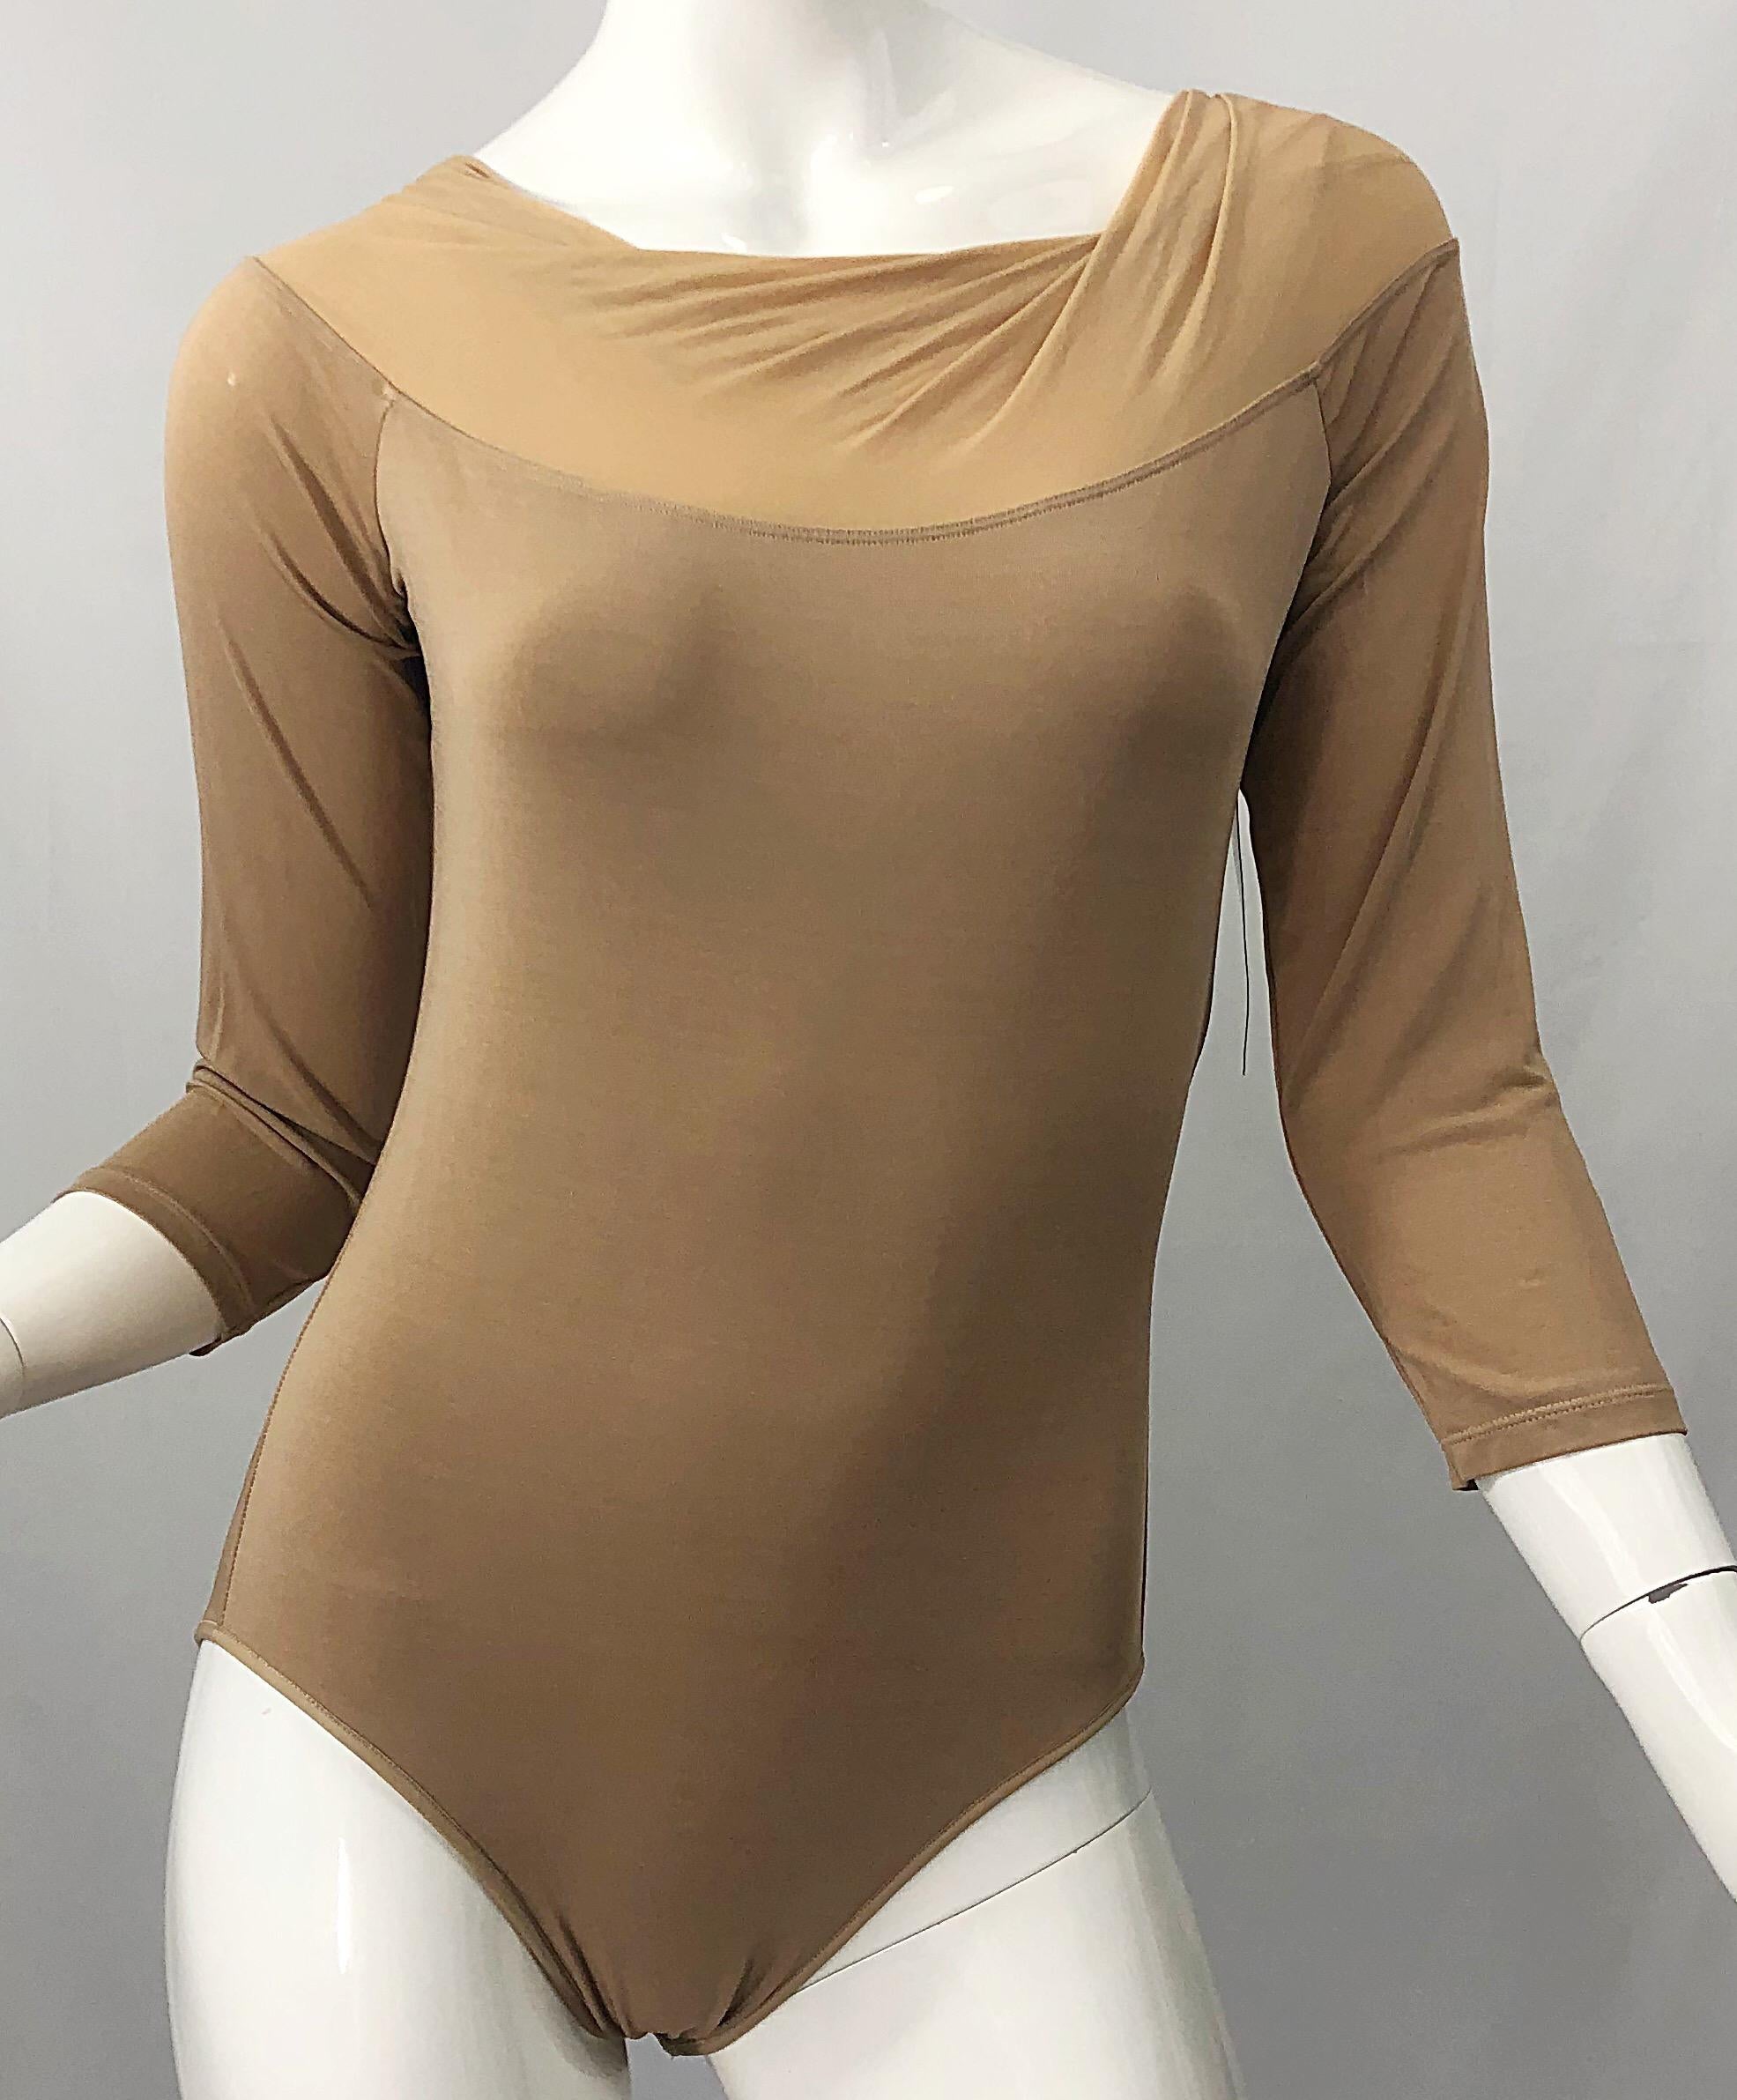 NWT $950 Donna Karan Collection 1990s Camel Nude 3/4 Sleeve One Piece Bodysuit M 6